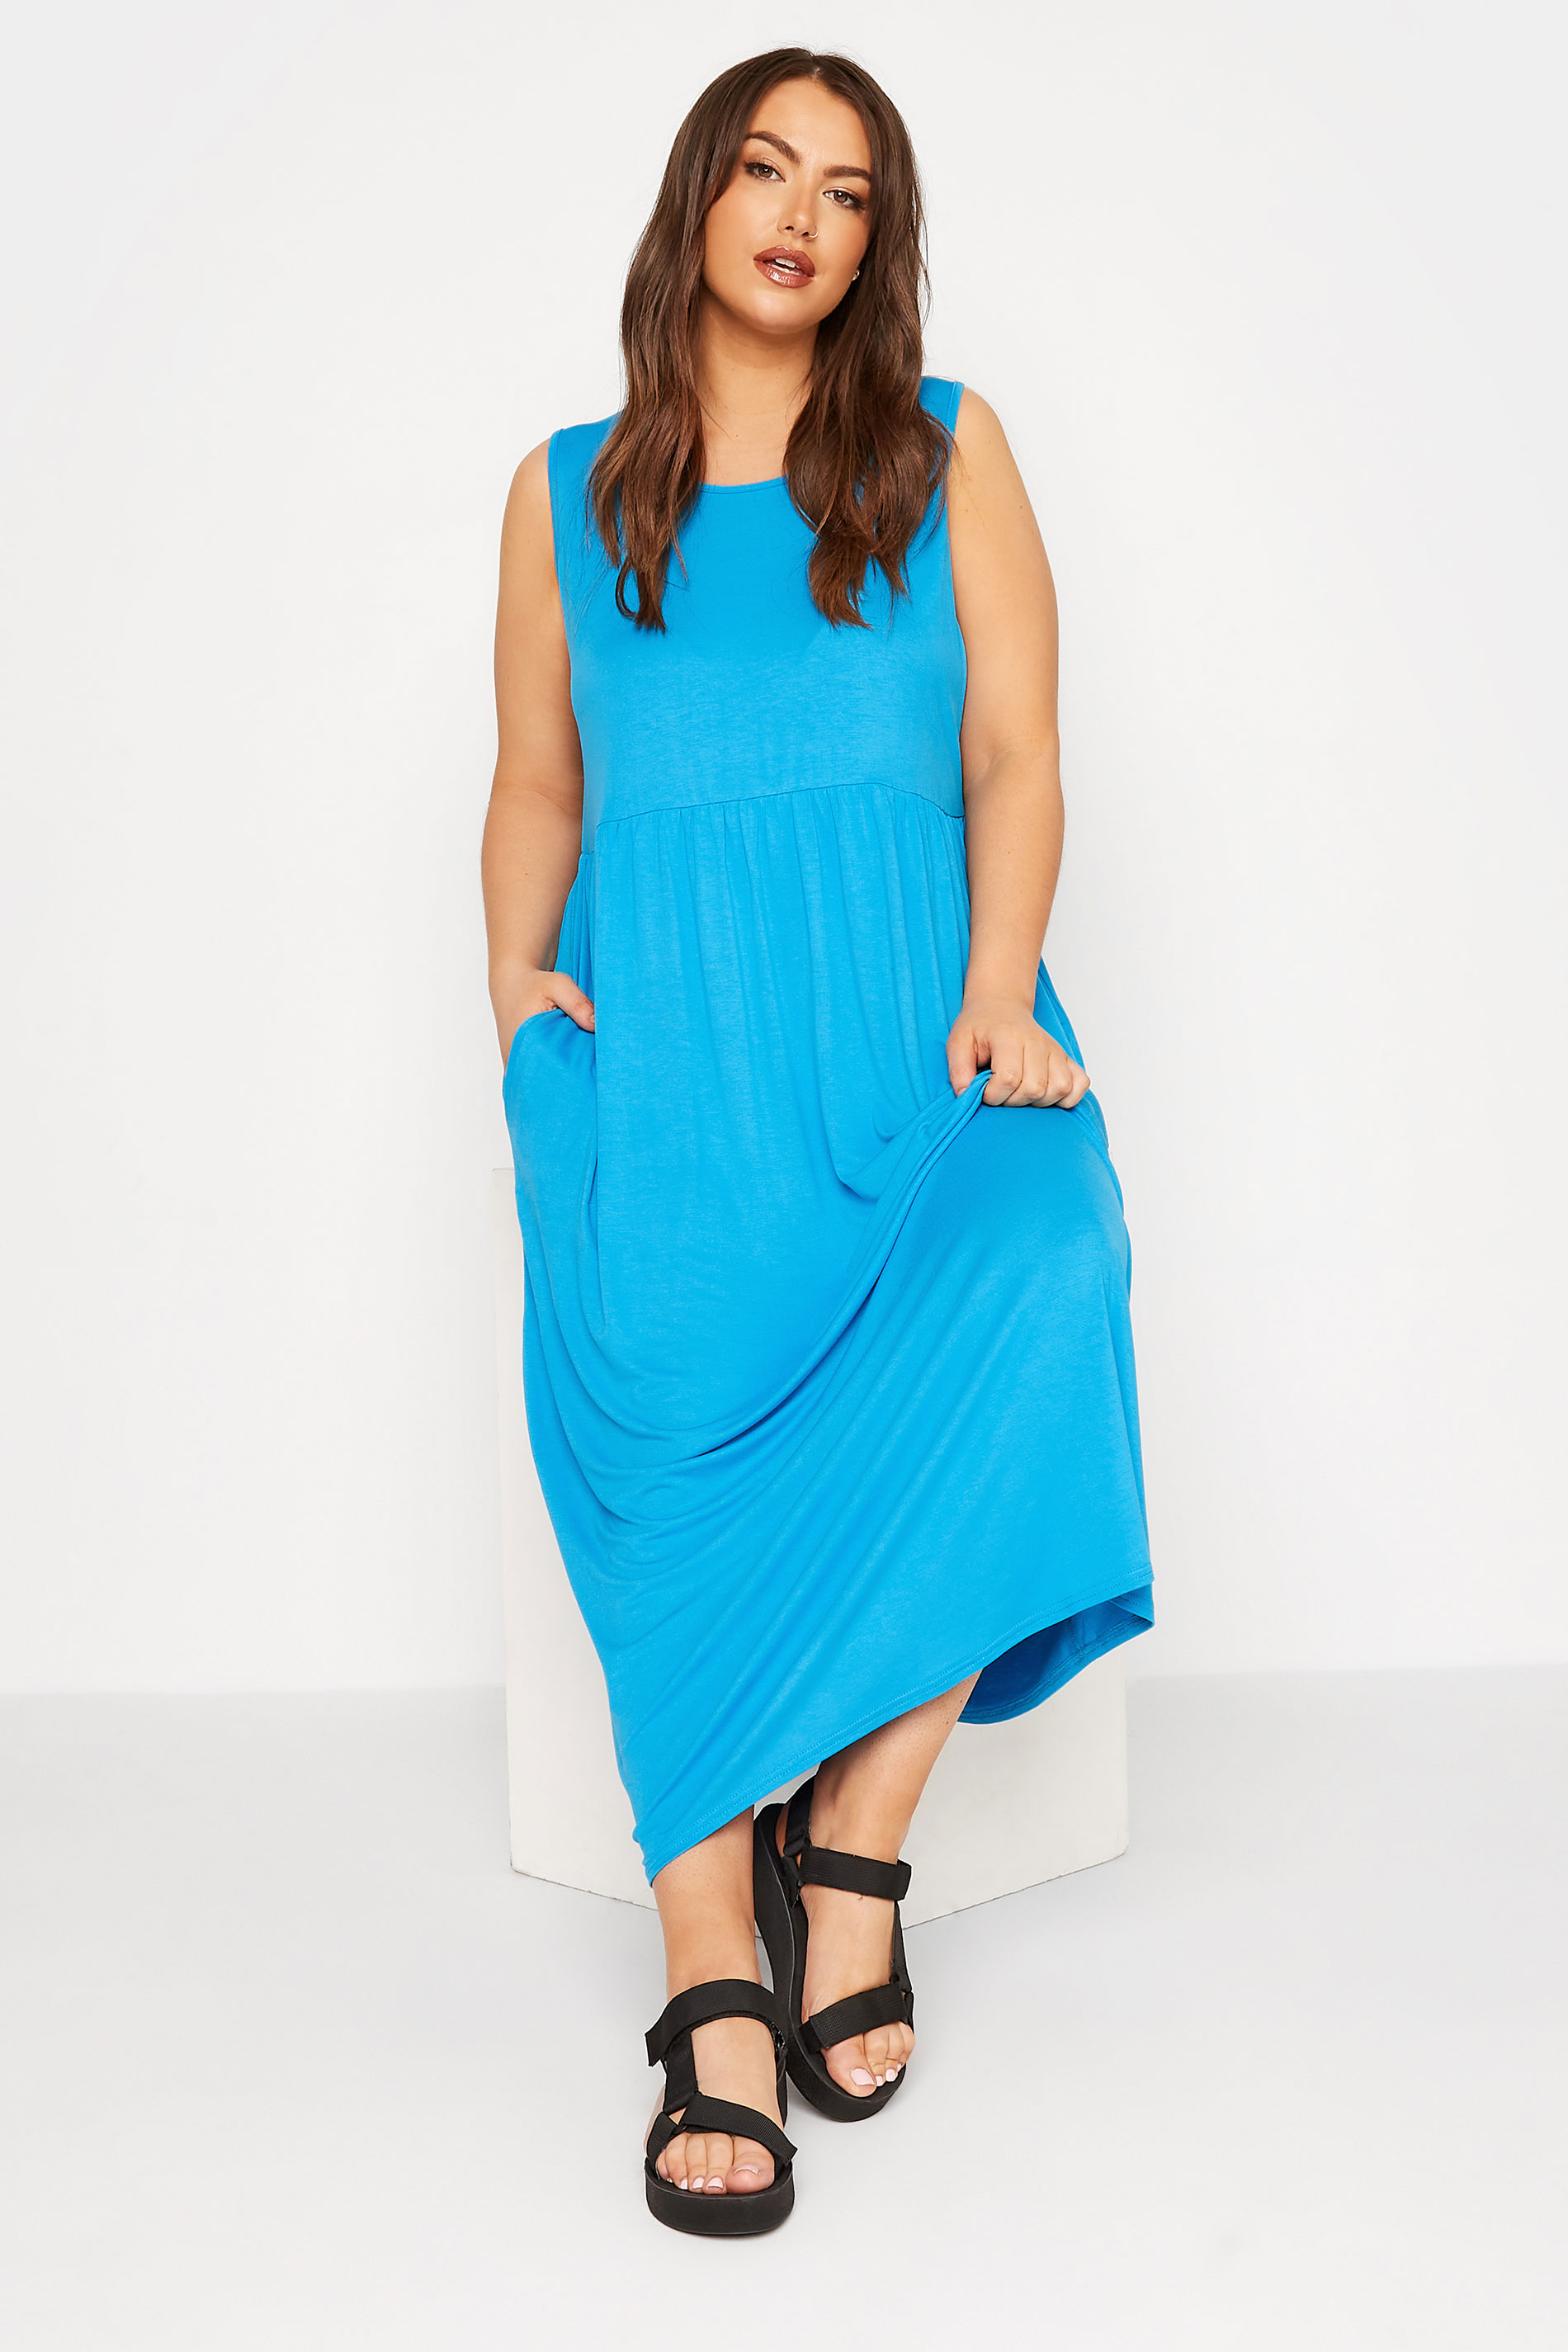 Robes Grande Taille Grande taille  Robes Longues | LIMITED COLLECTION - Robe Bleue Turquoise Maxi à Poches - CD82725